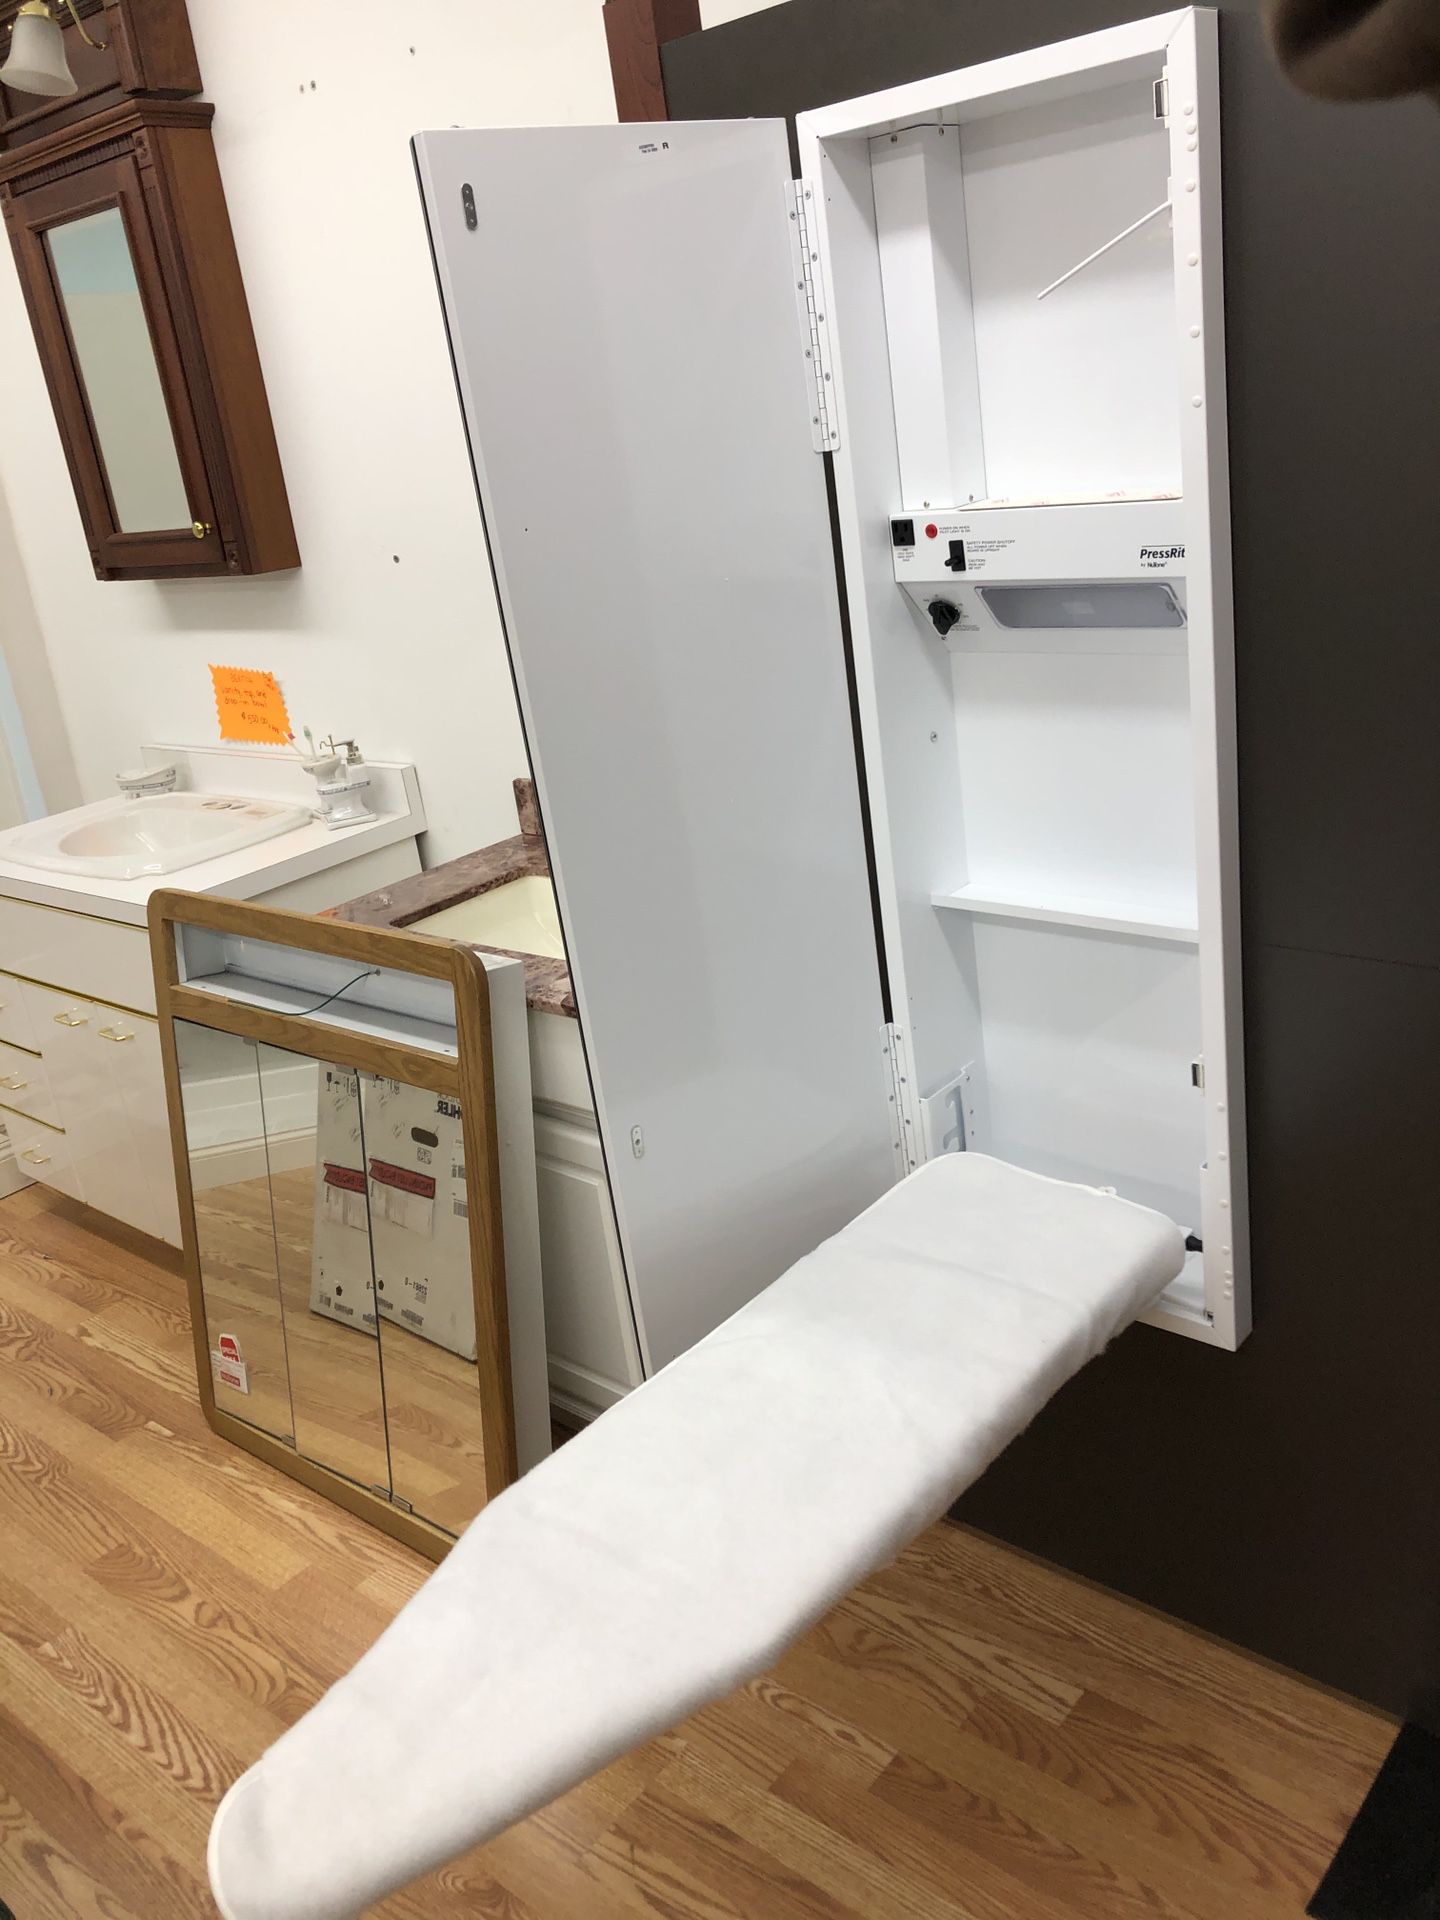 Nutone mirror with built in ironing center